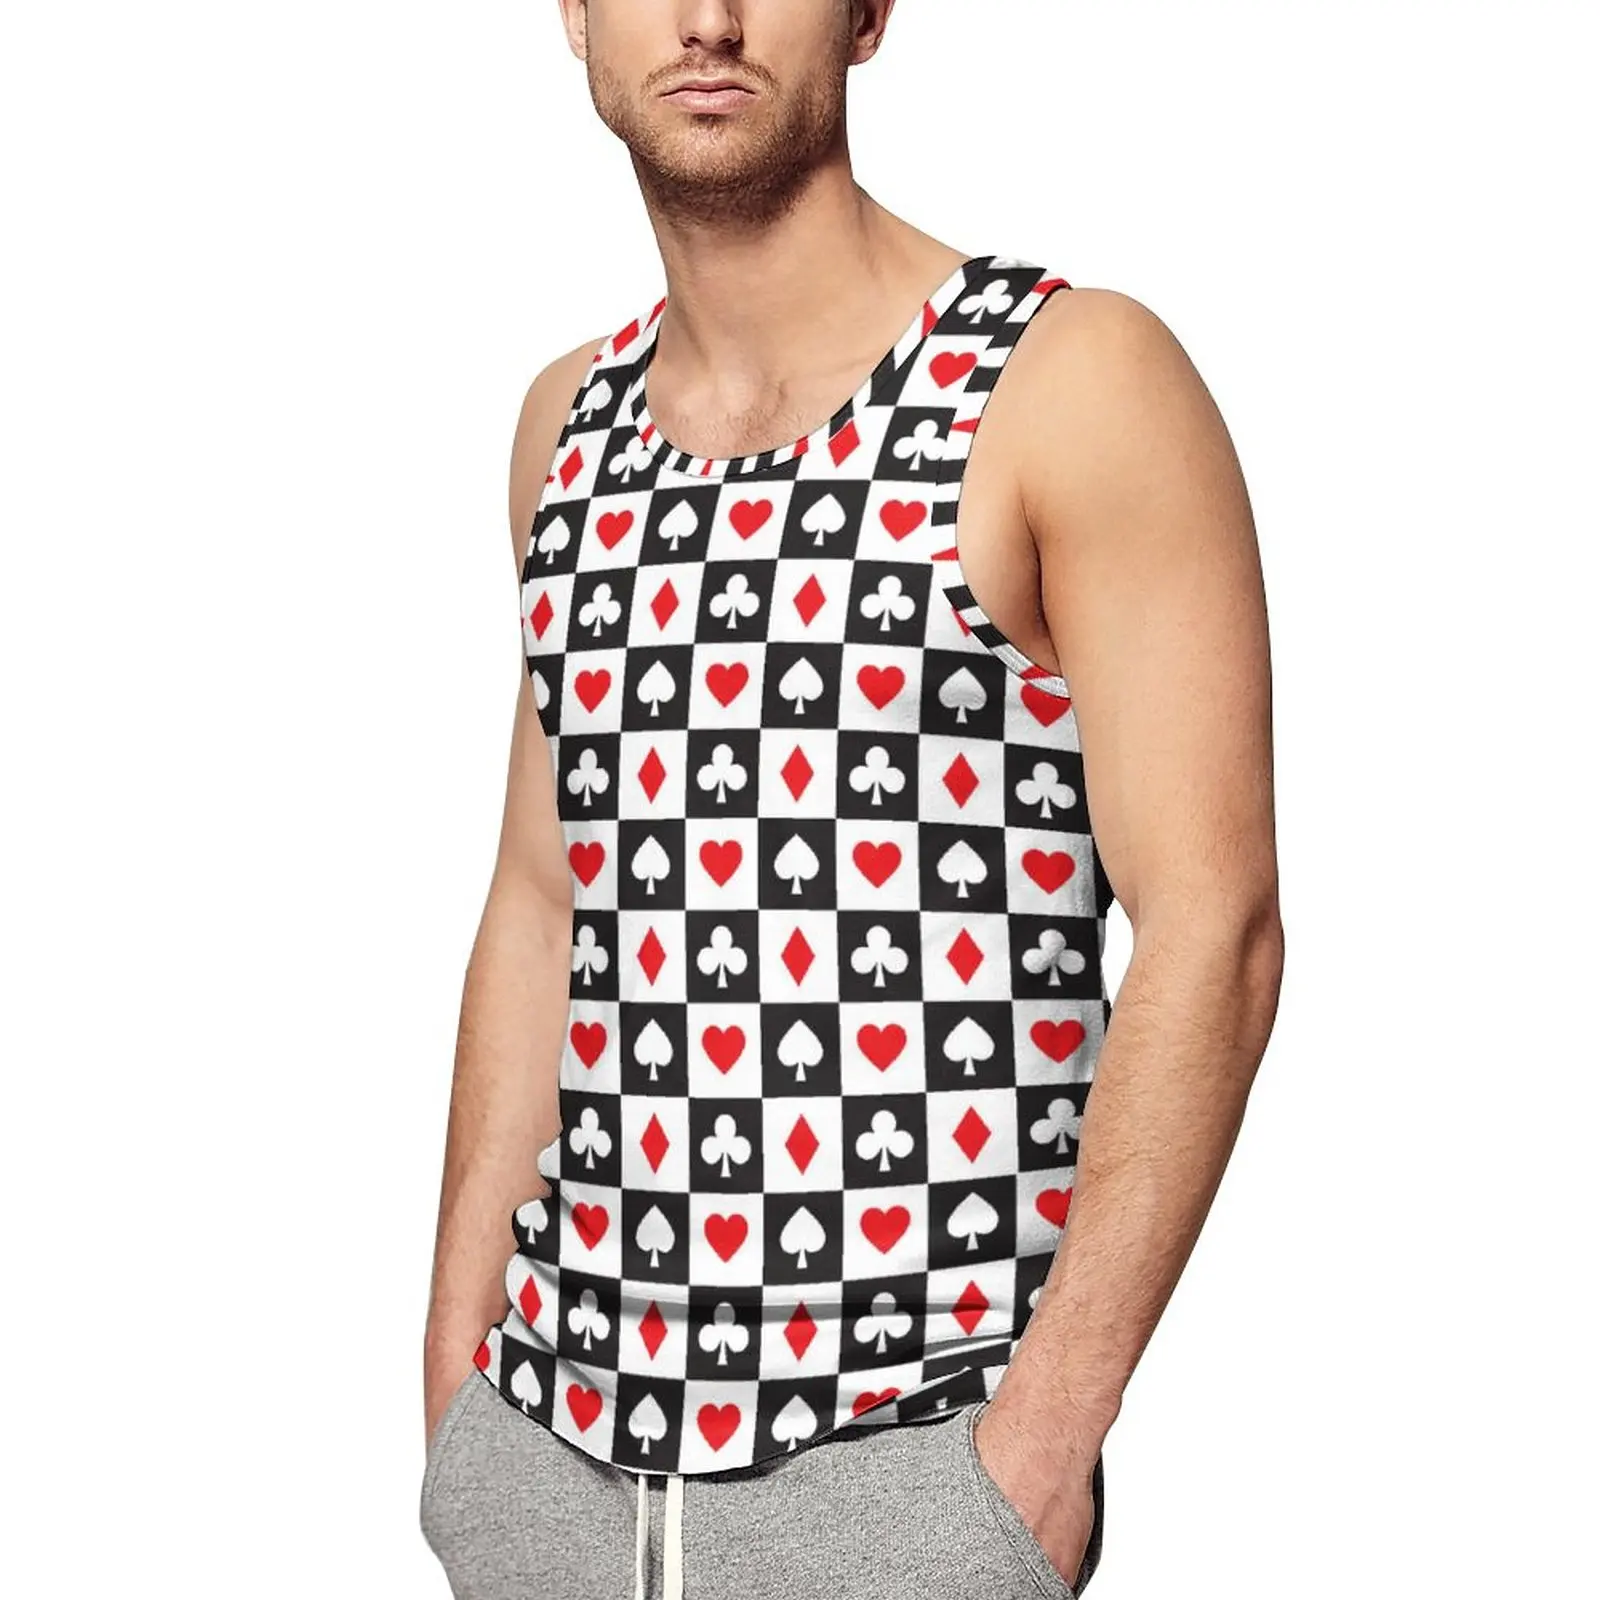 

Heart Playing Cards Tank Top Mens Poker Gym Oversized Tops Beach Muscle Design Sleeveless Shirts